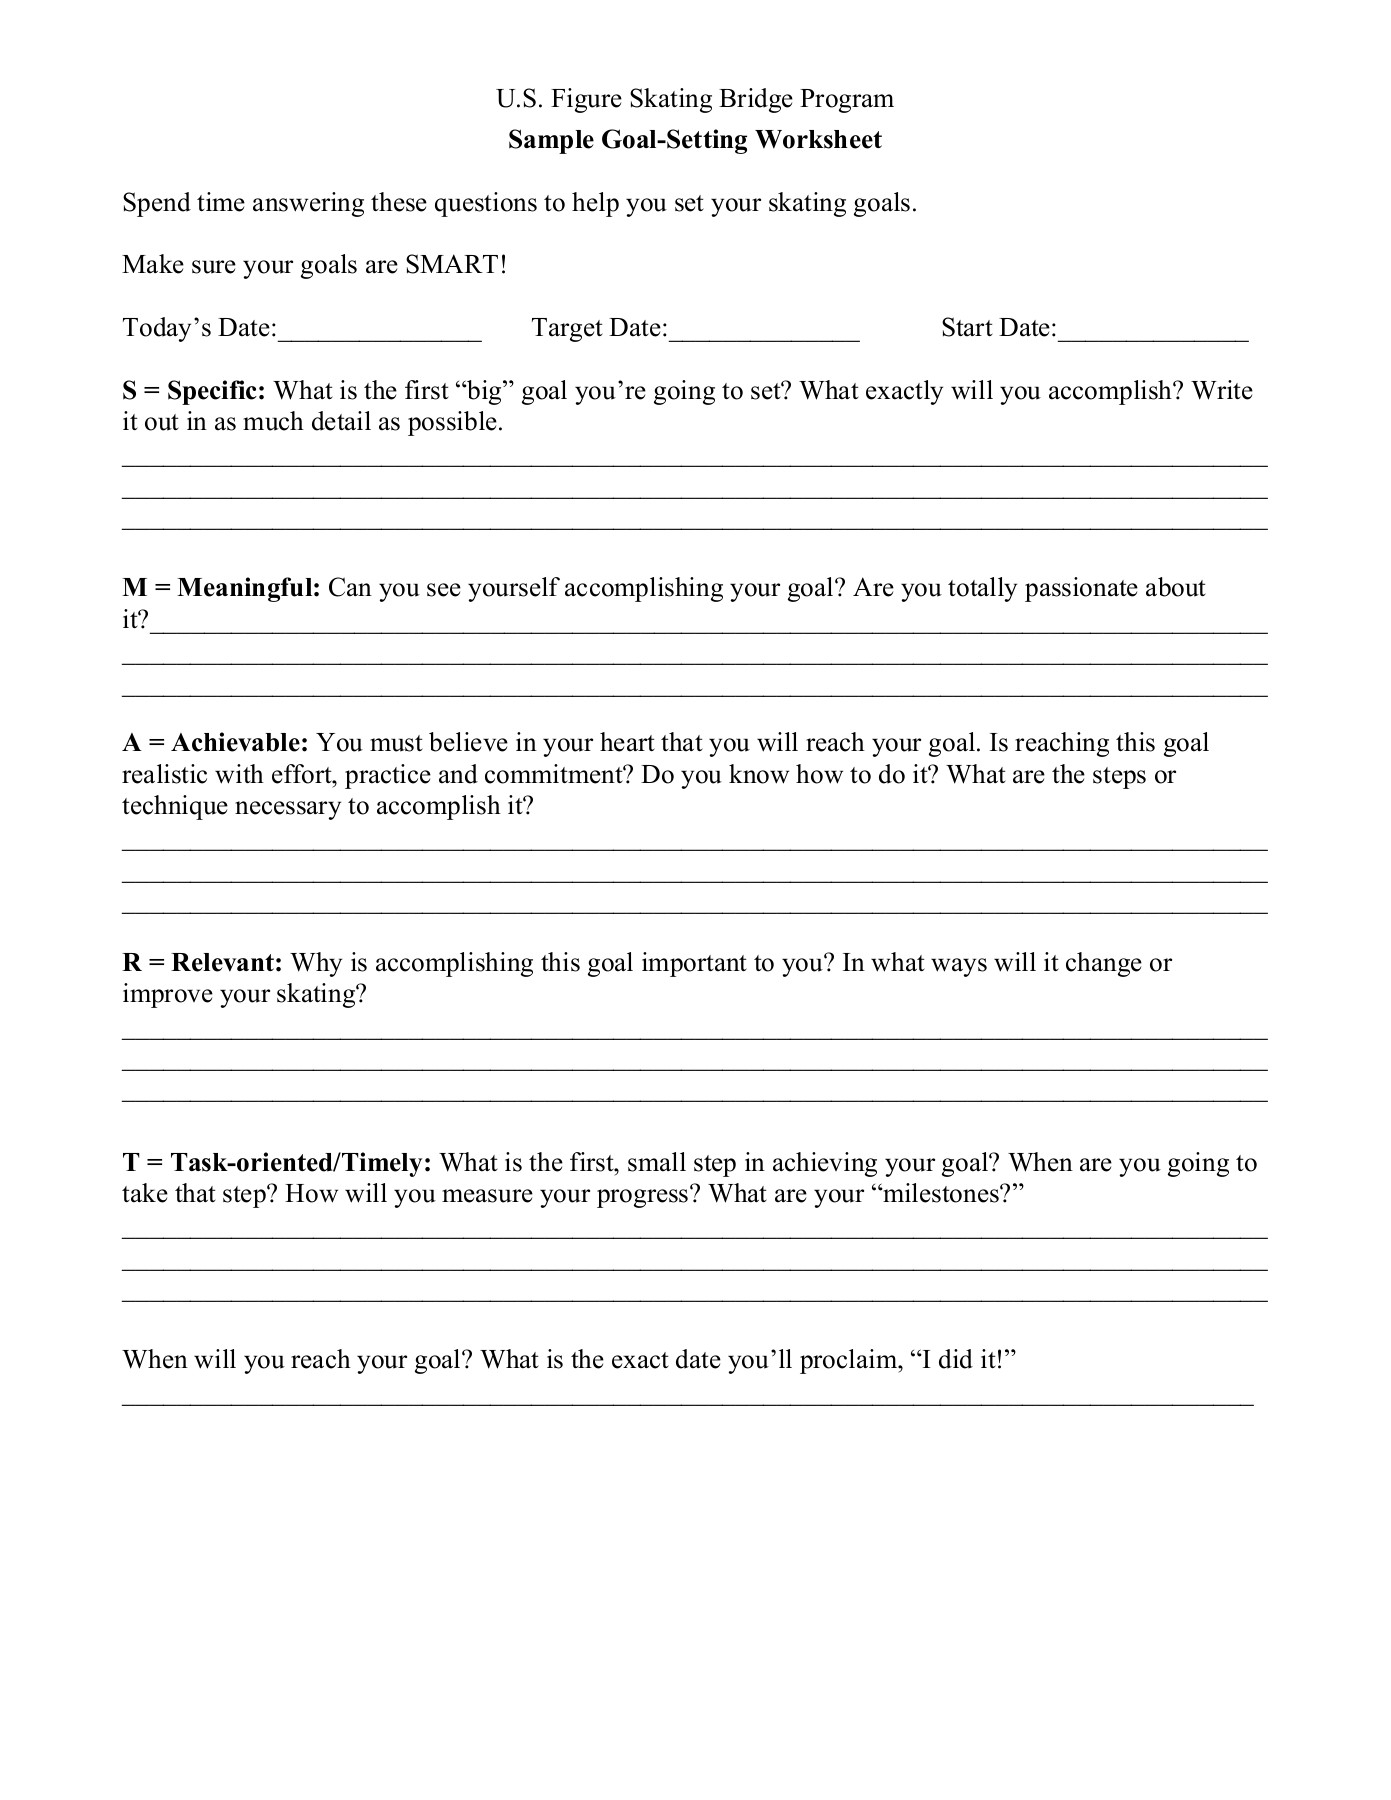 Goal-Setting And Self-Confidence Worksheets.pdf Pages 1 - 4